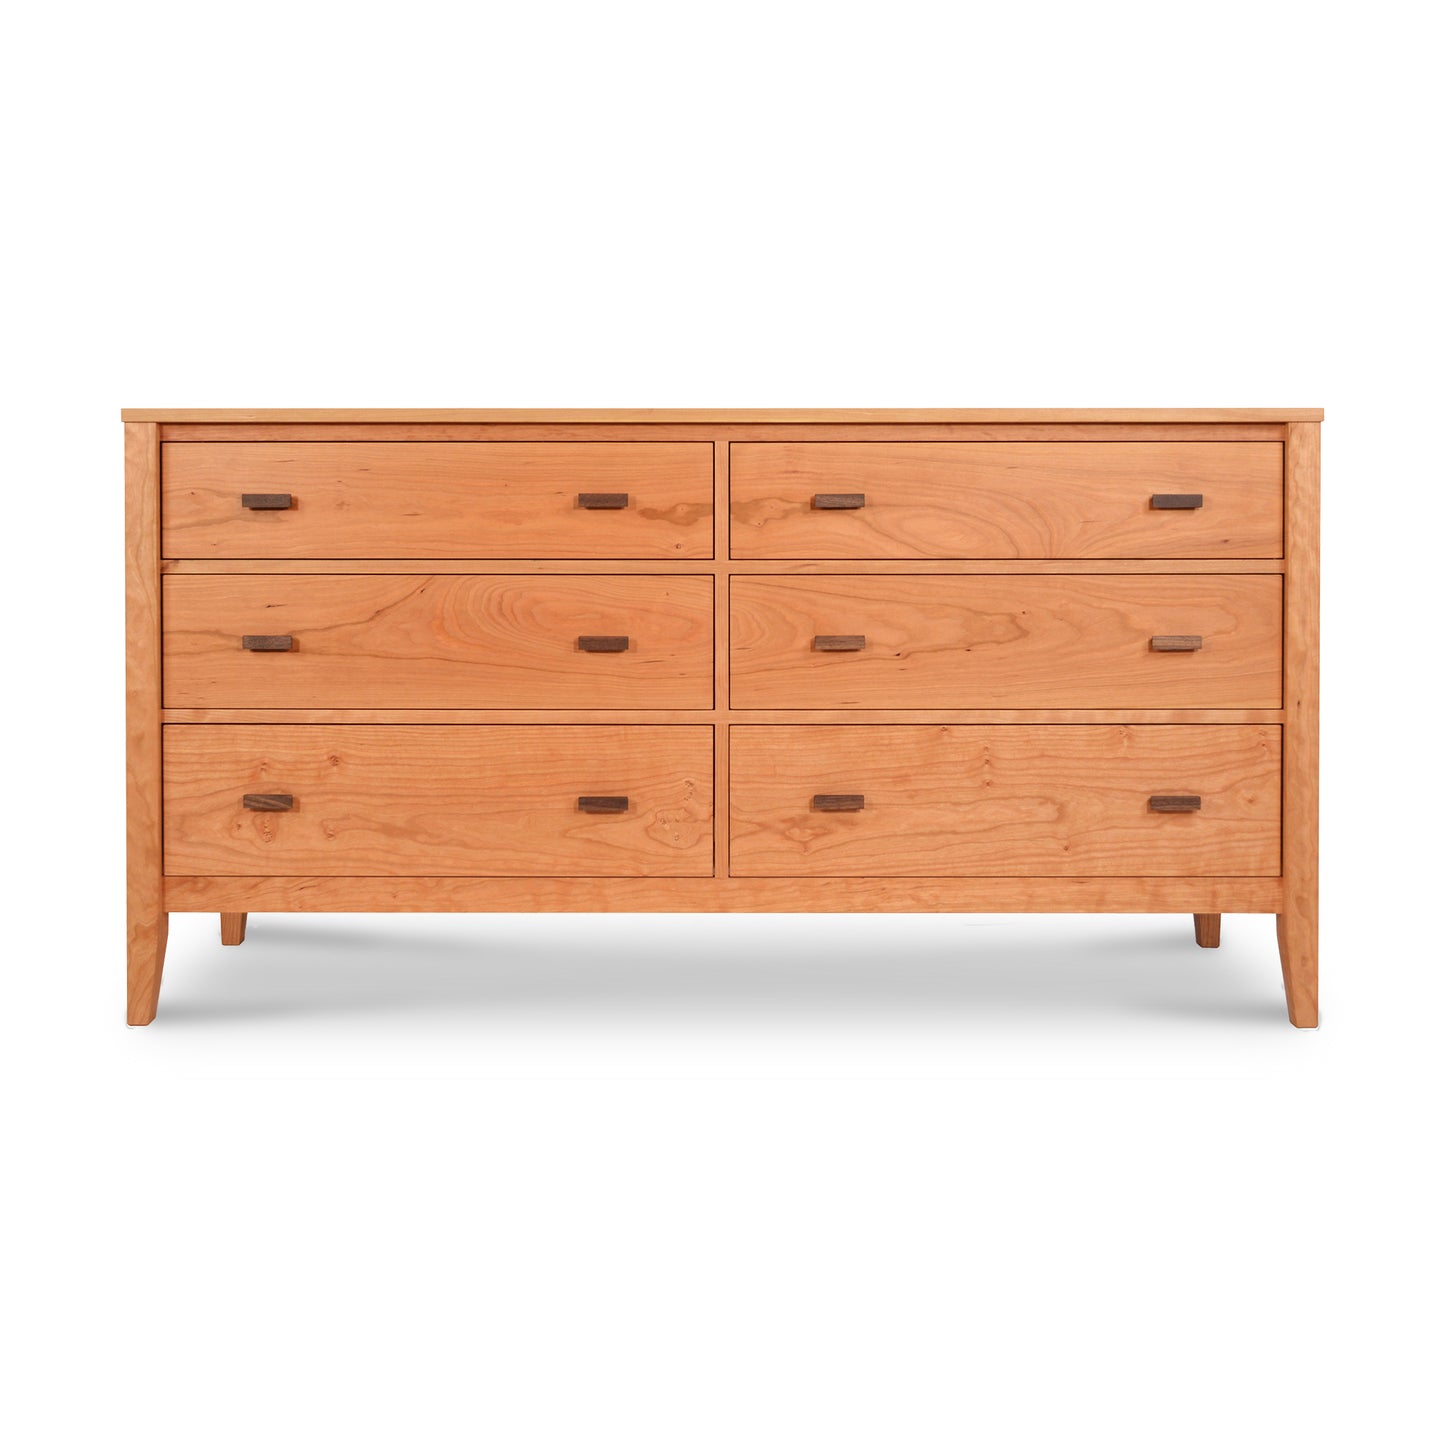 An image of a modern wooden dresser with six drawers, featuring an Andover Modern design, made by Maple Corner Woodworks.